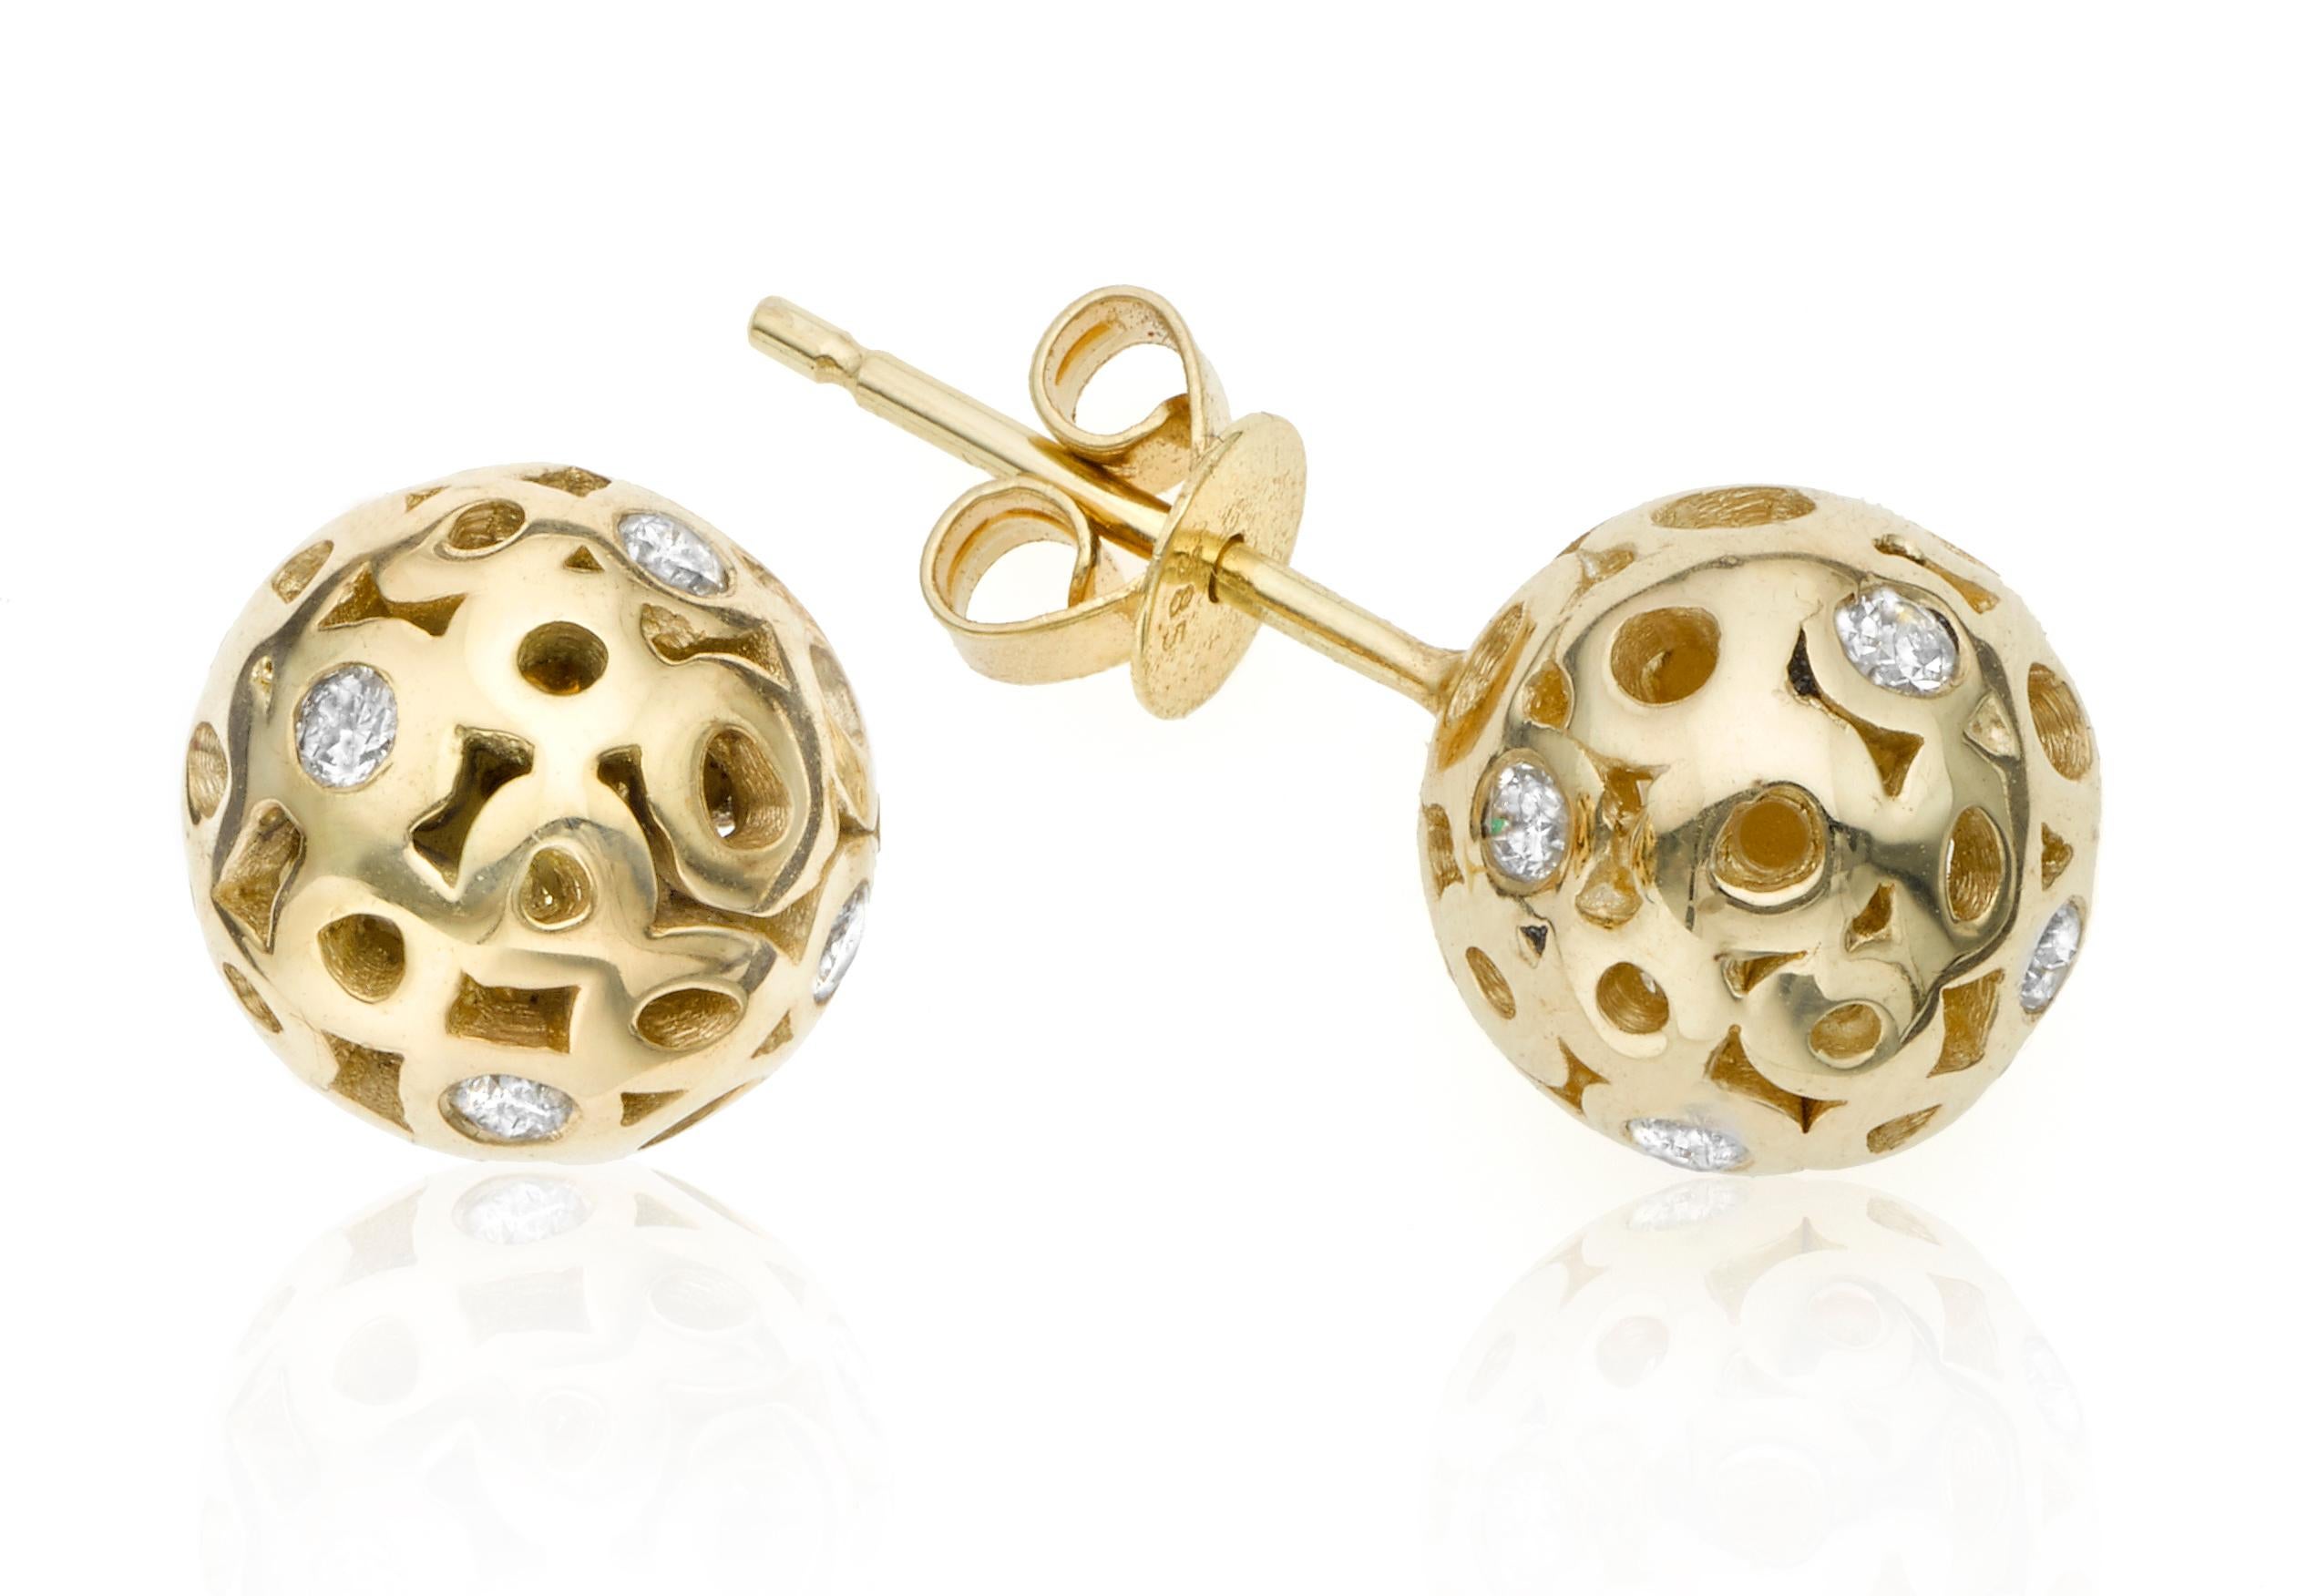 These are not your ordinary pair of classic stud earrings.  Made of two half-spheres composed of Hi June Parker's signature organic circles sprinkled with white diamonds. Also a sophisticated and elegant option for bridal or weddings. These stud